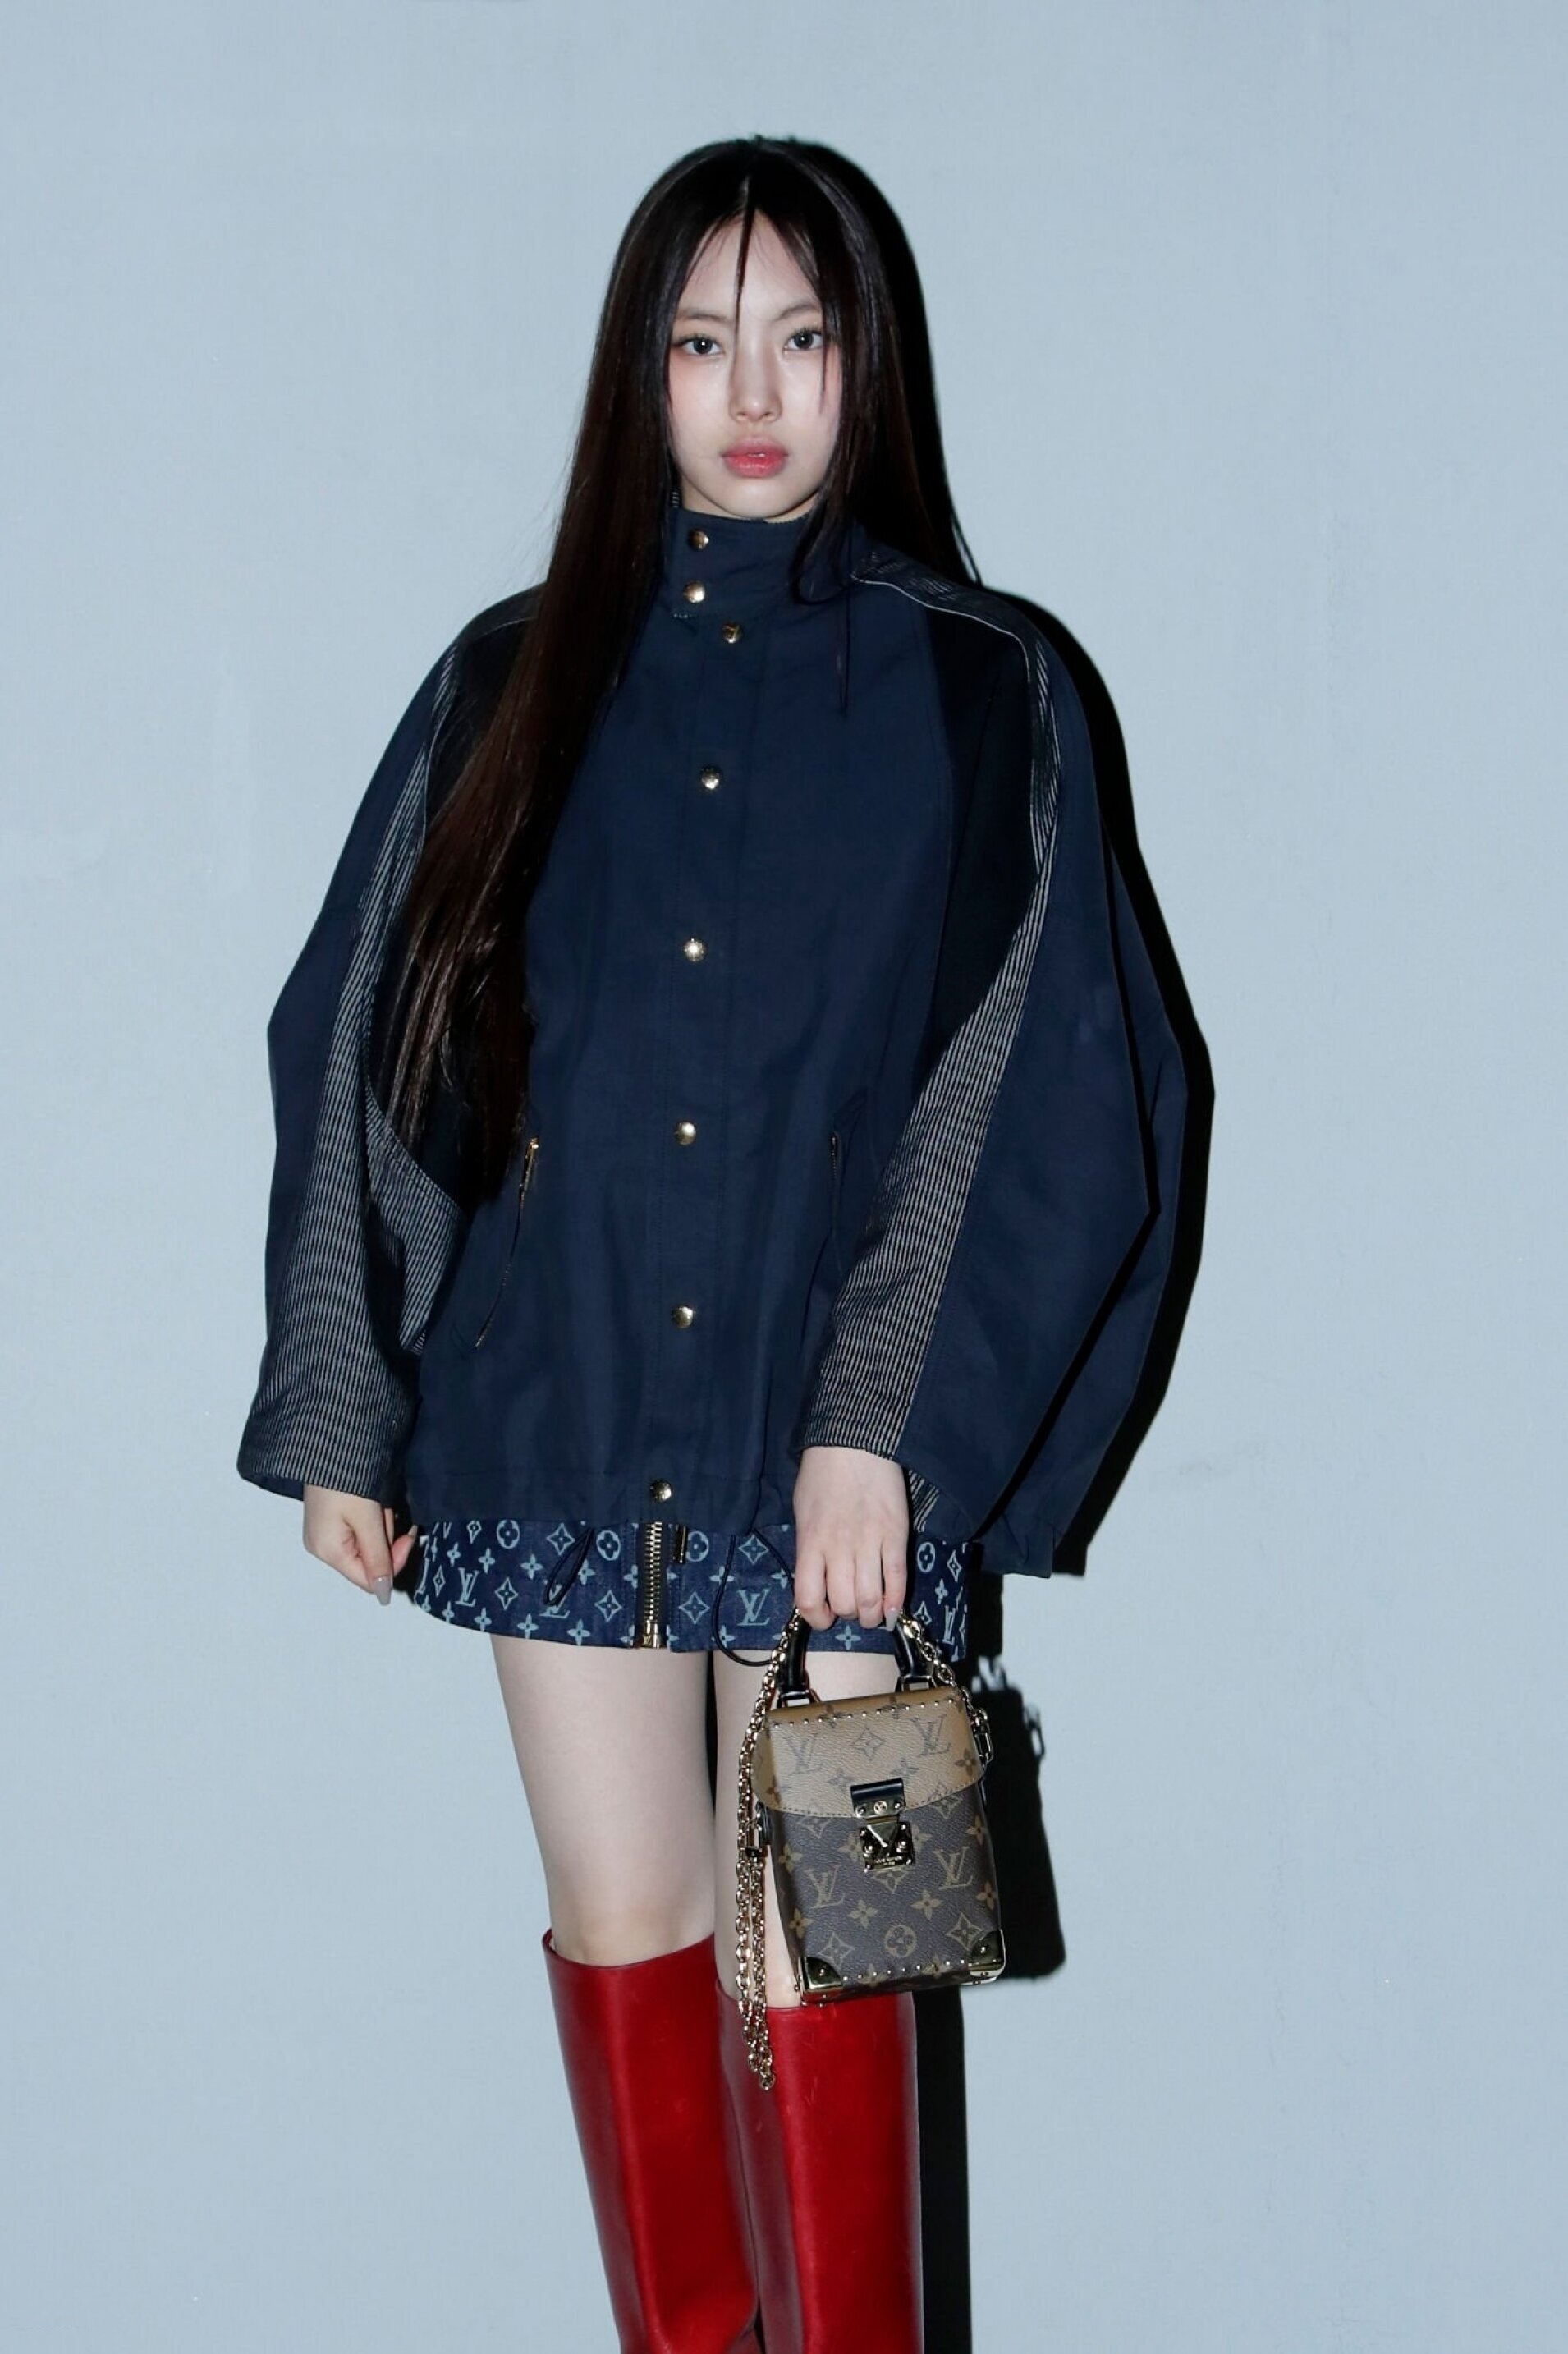 NewJeans Hyein shines at the Louis Vuitton 2023 pre-fall collection event  in Seoul